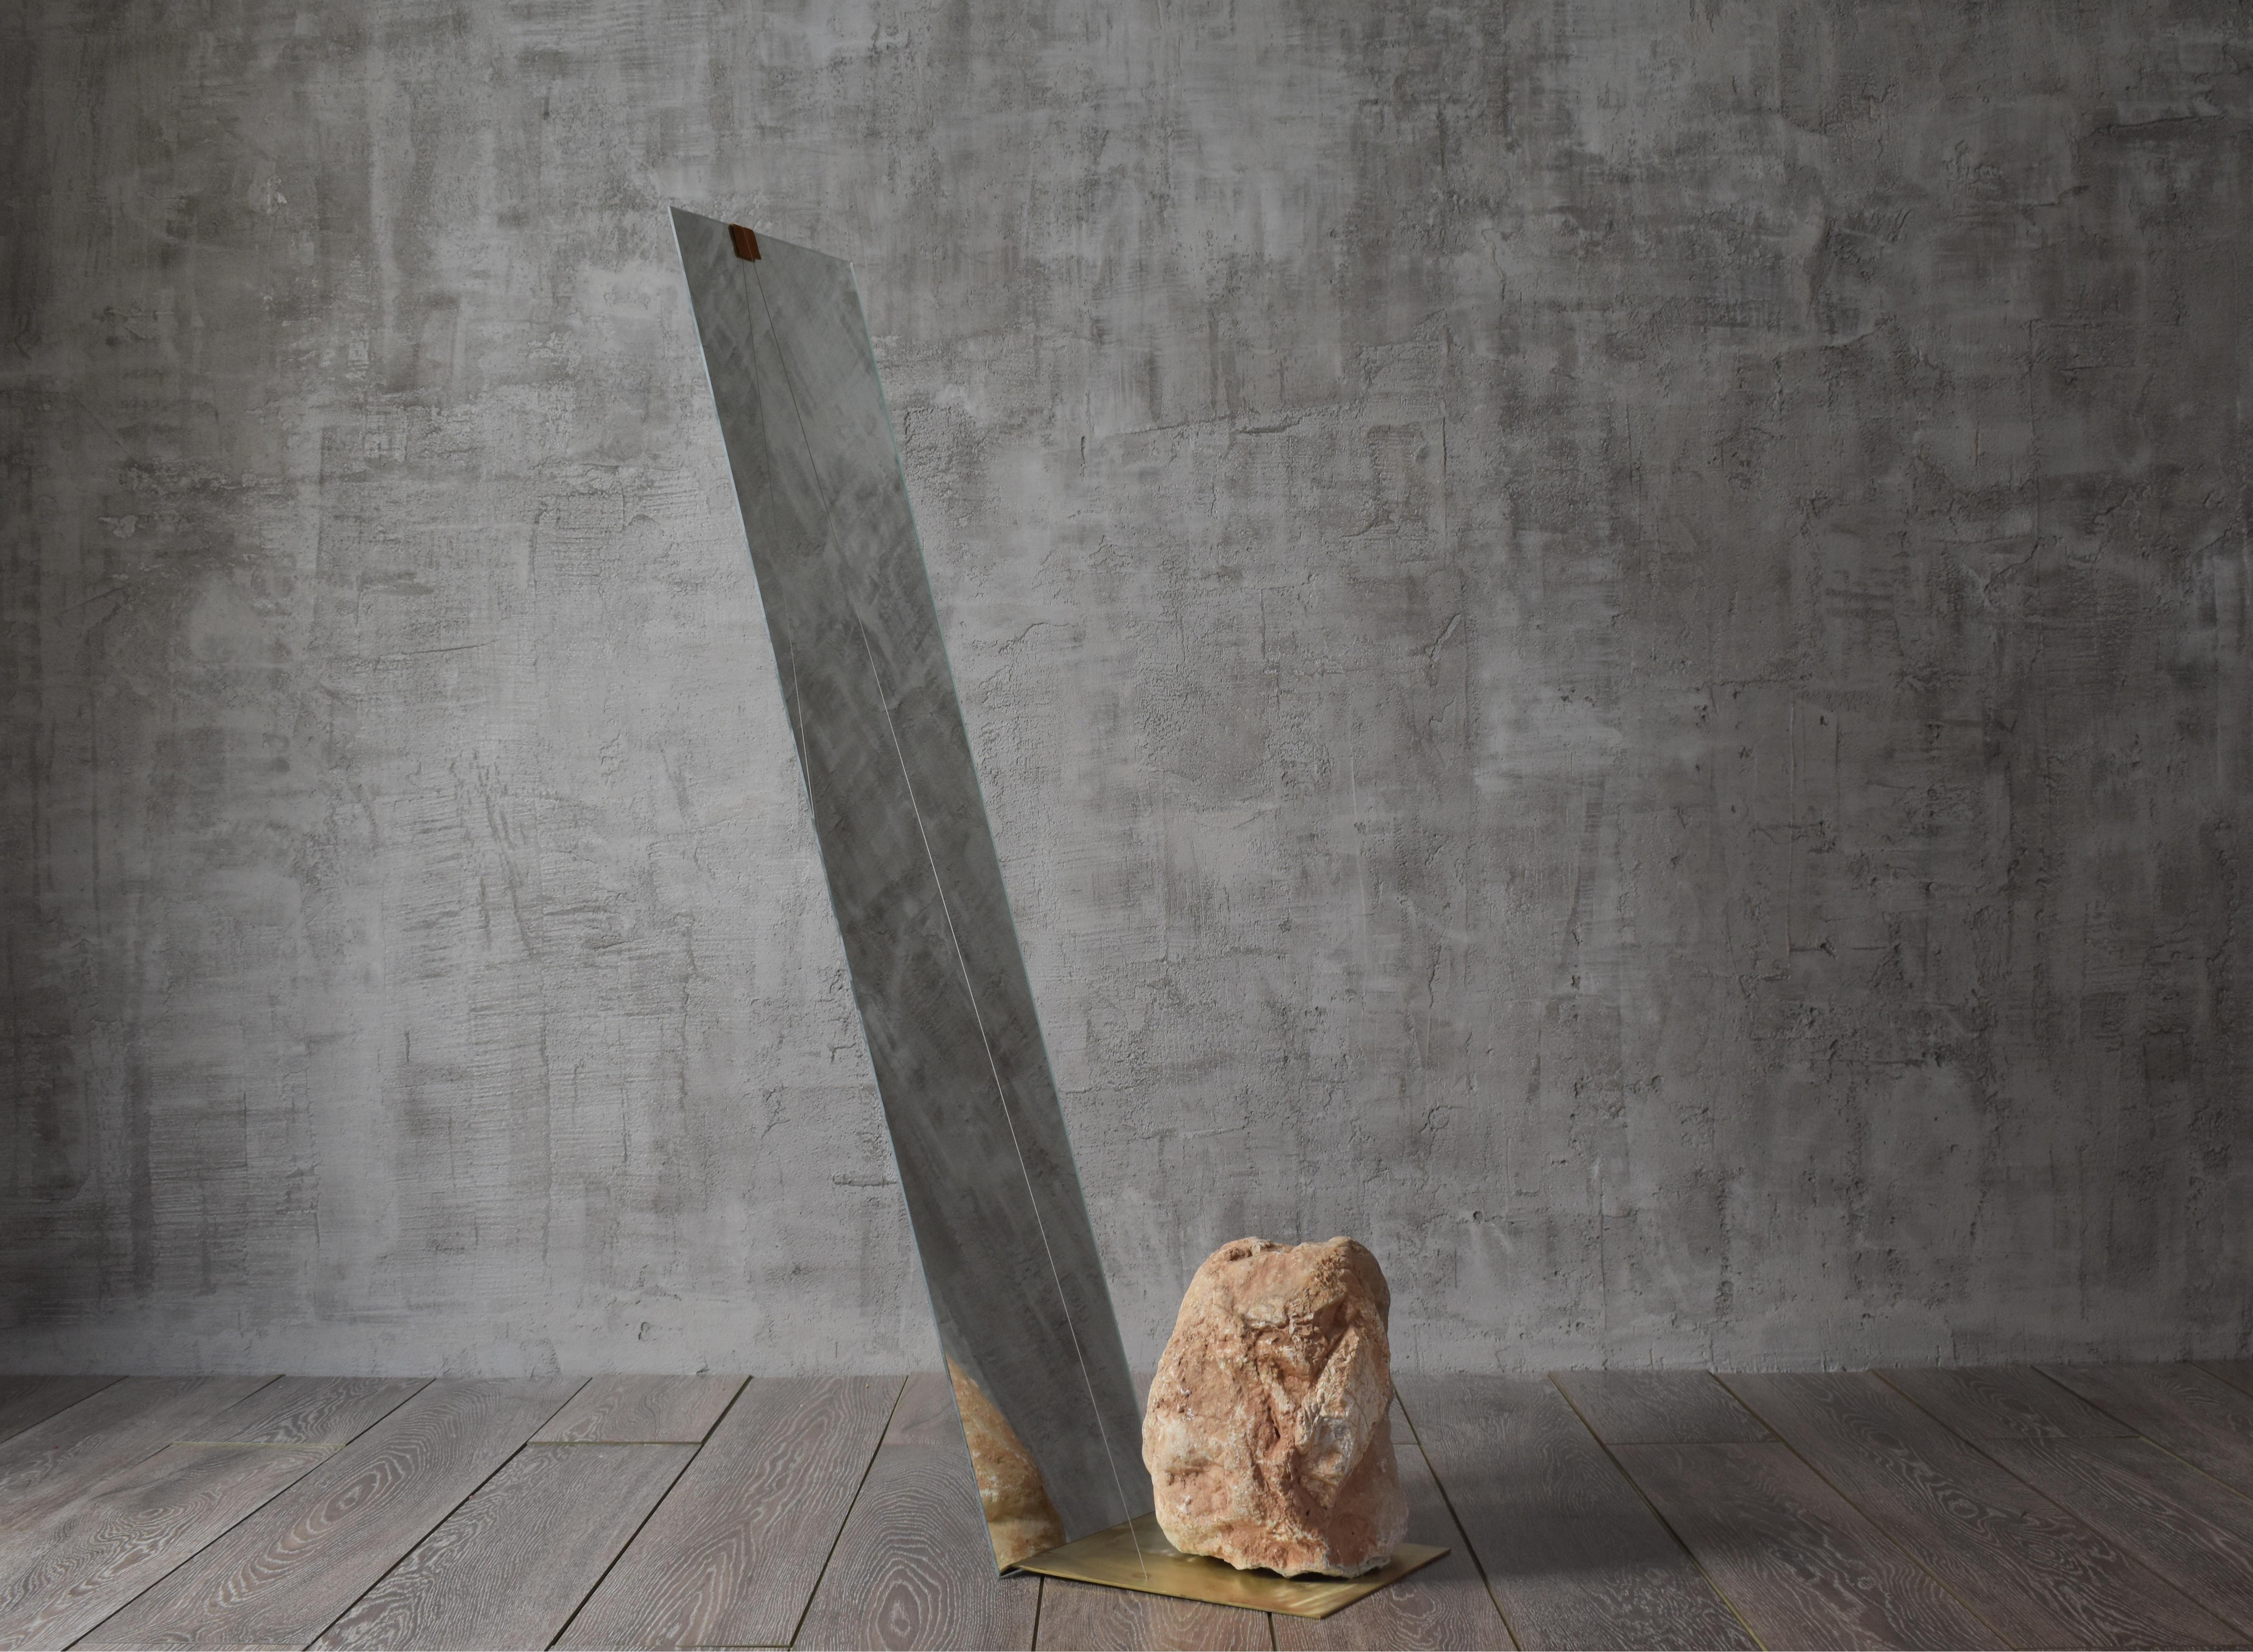 Lithos floor mirror by Periclis Frementitis
Limited edition of 3
Design: Lithos
Designer: Periclis Frementitis
Studio: HIGHDOTS
Dimensions: Height 140cm x width 30cm
Materials: Solid brass basement, raw stone, leather, mirror.

   
 
 